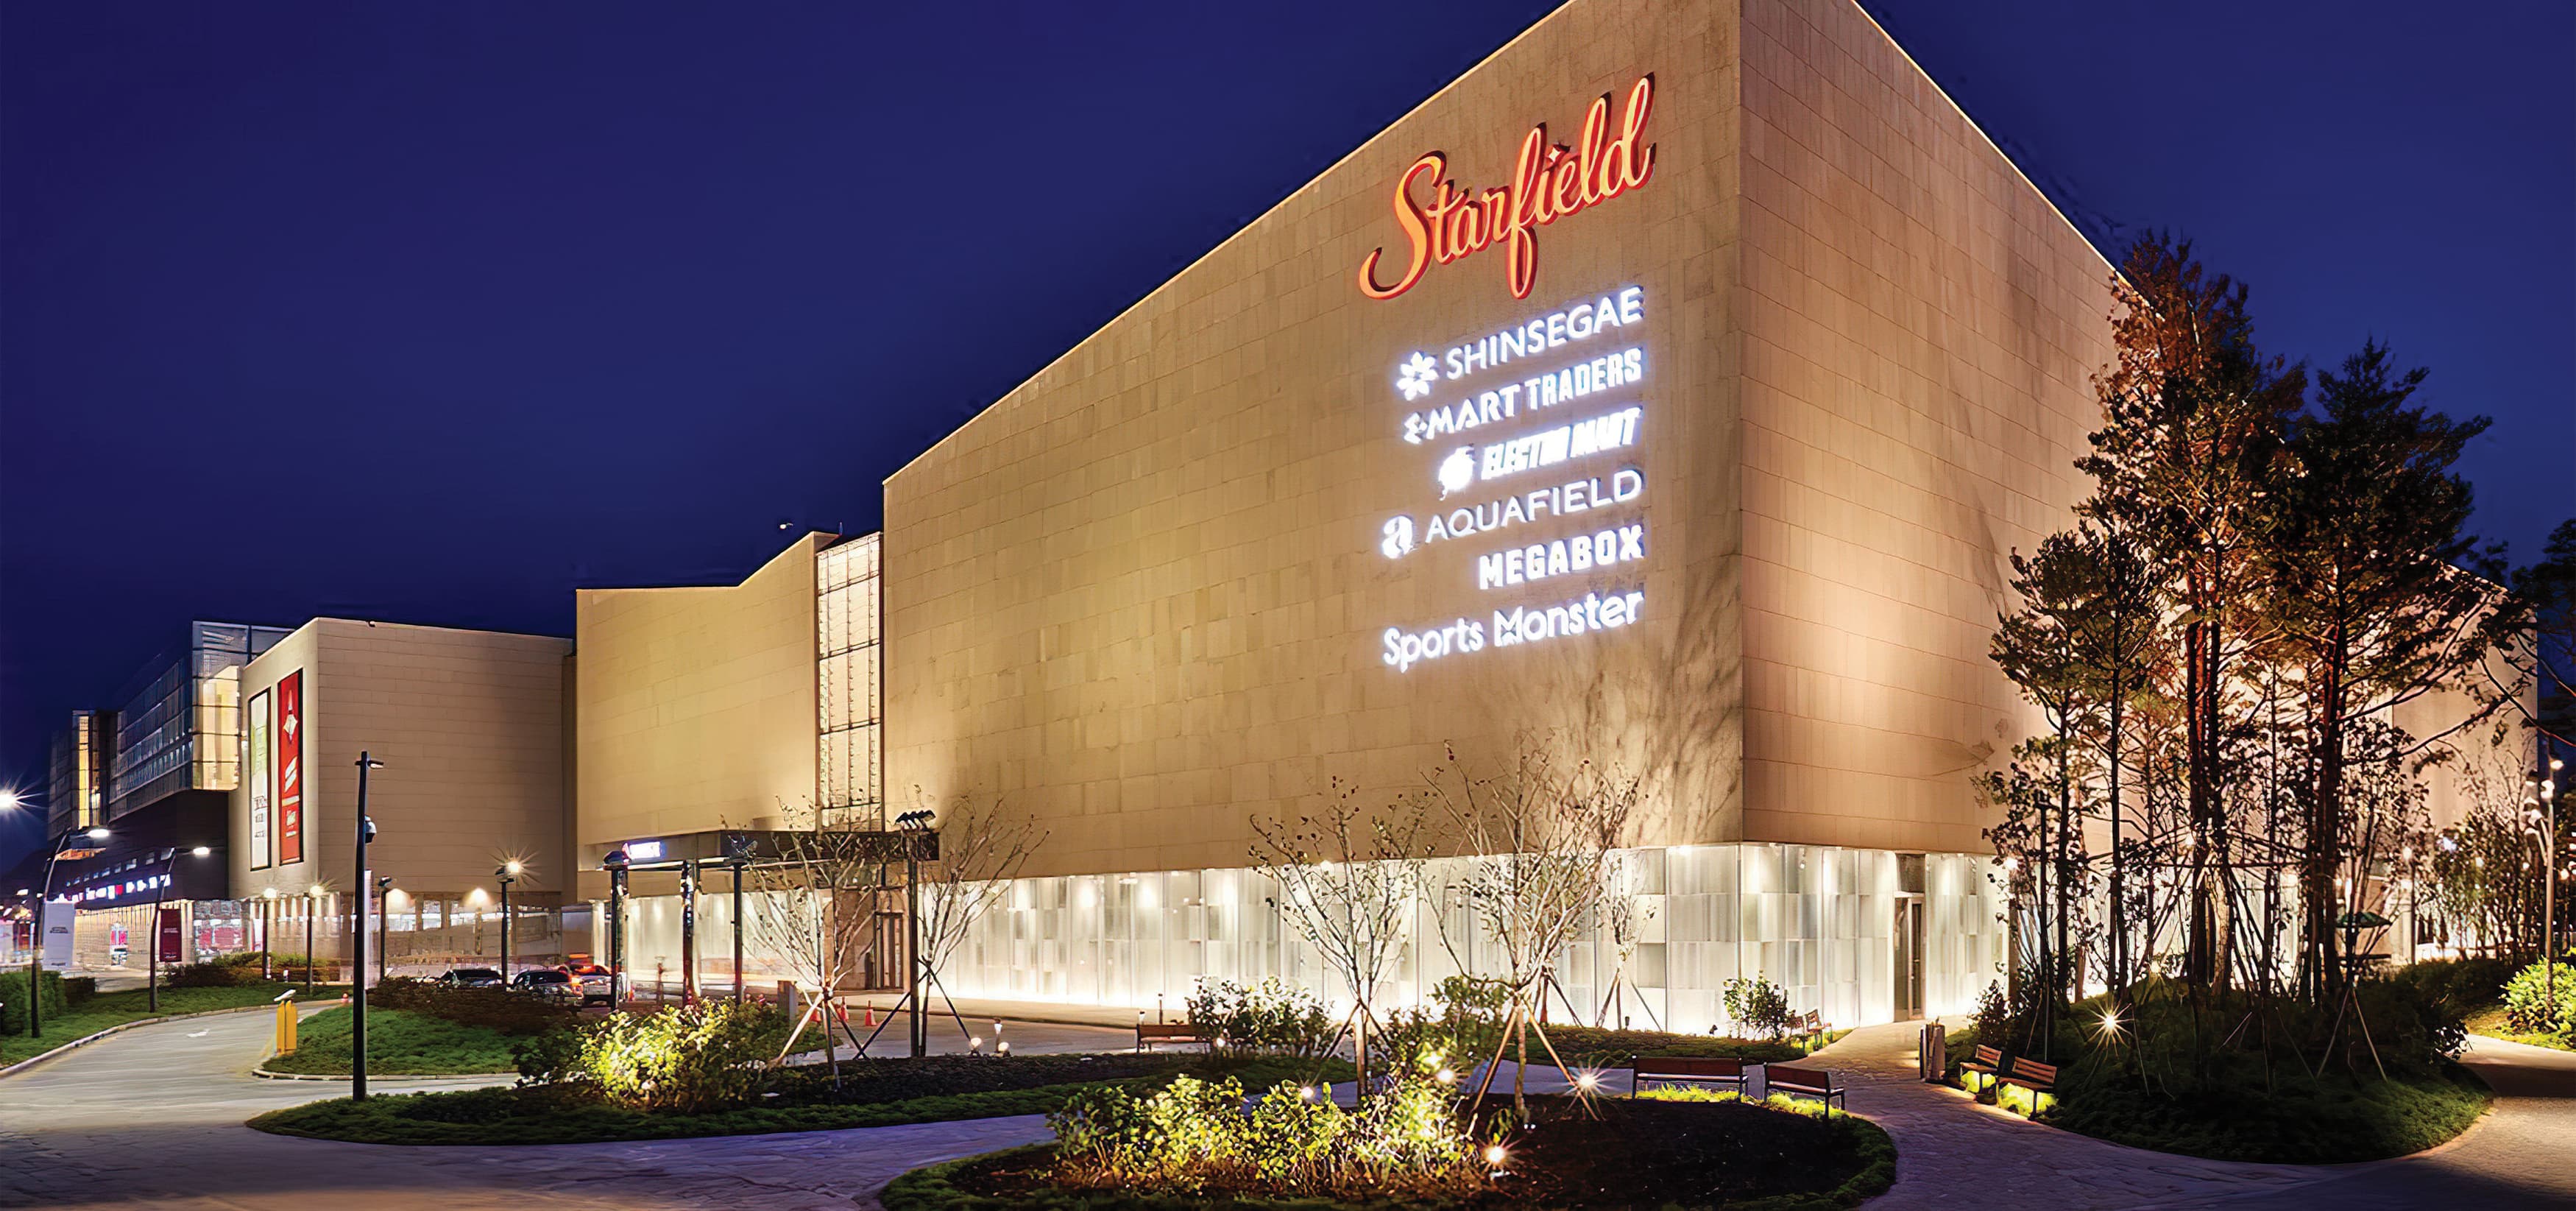 Starfield, a retail project in Hanam, South Korea. Exterior Architectural Facade Project Identity Signage and Illuminated Tenant Signage